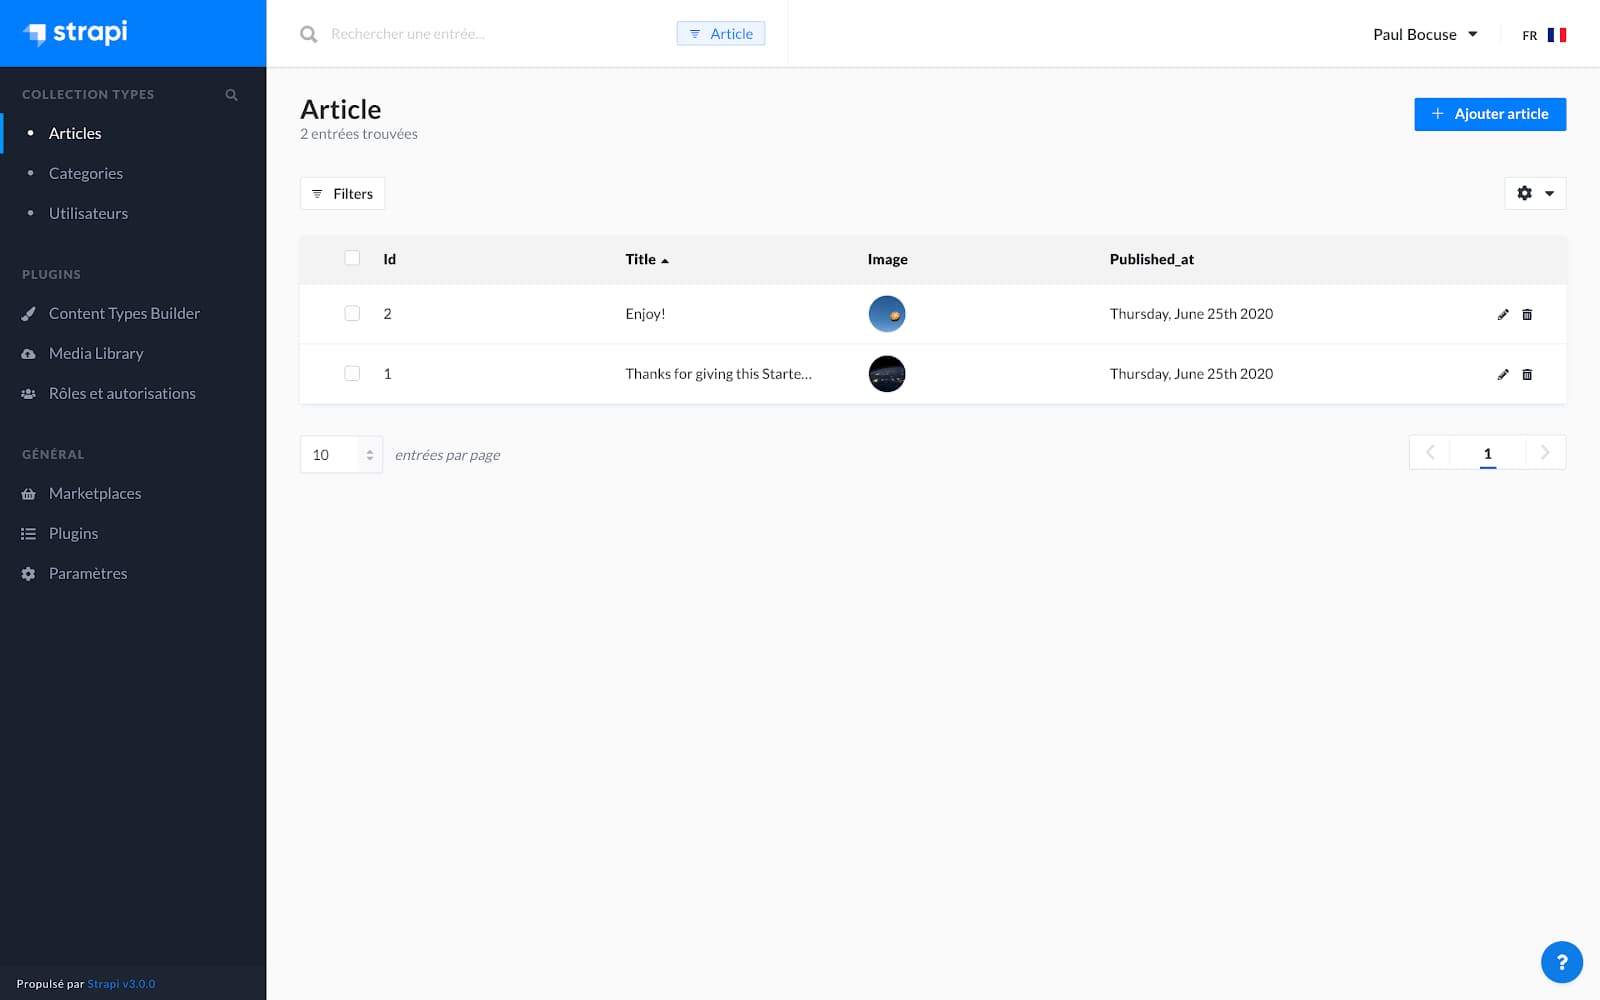 Articles listed in the Strapi UI.